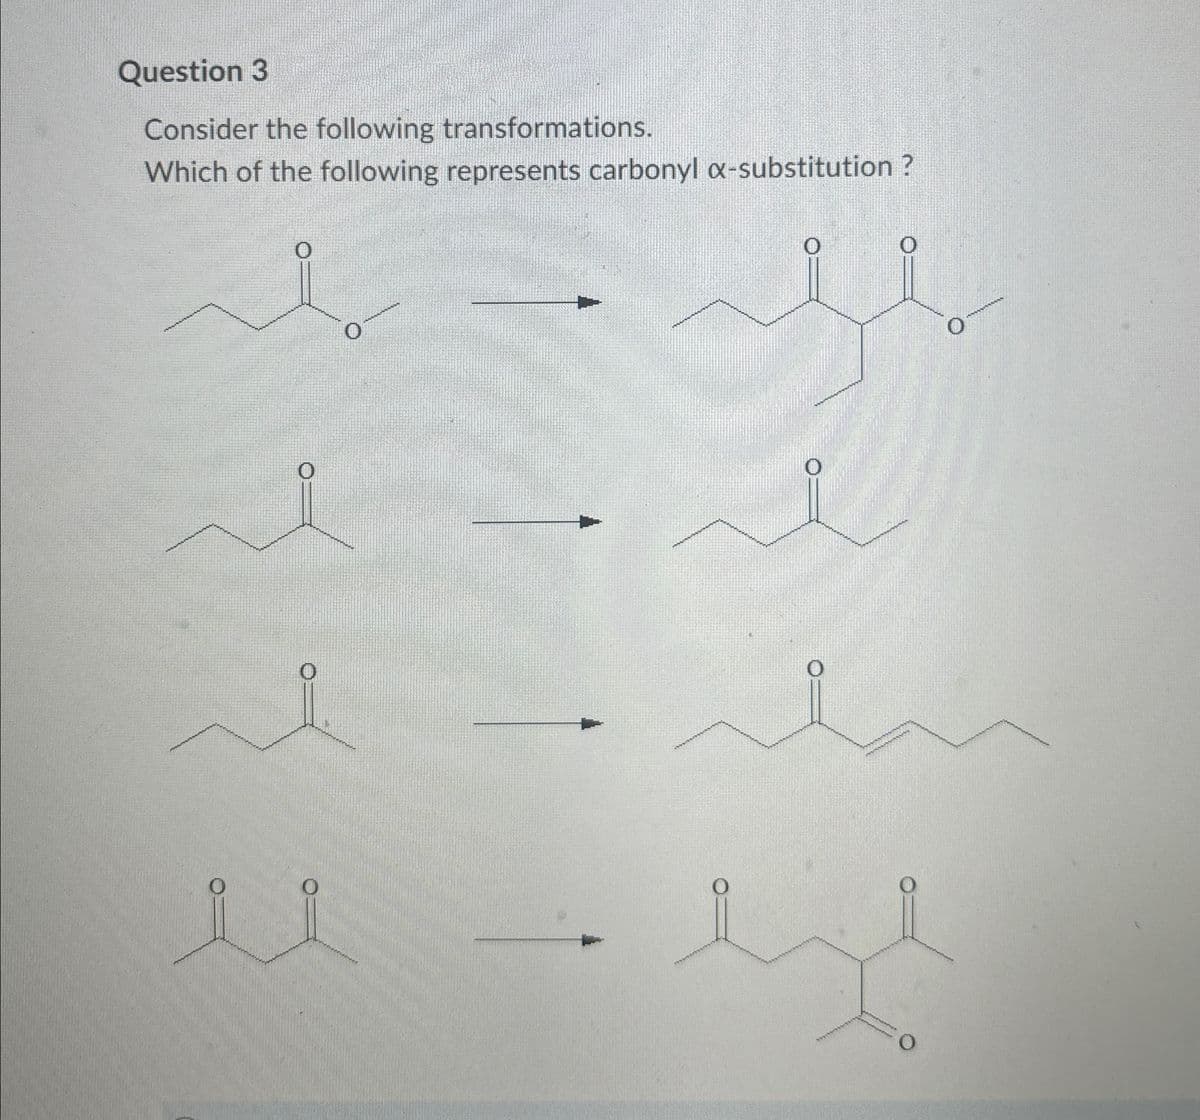 Question 3
Consider the following transformations.
Which of the following represents carbonyl x-substitution?
0
0